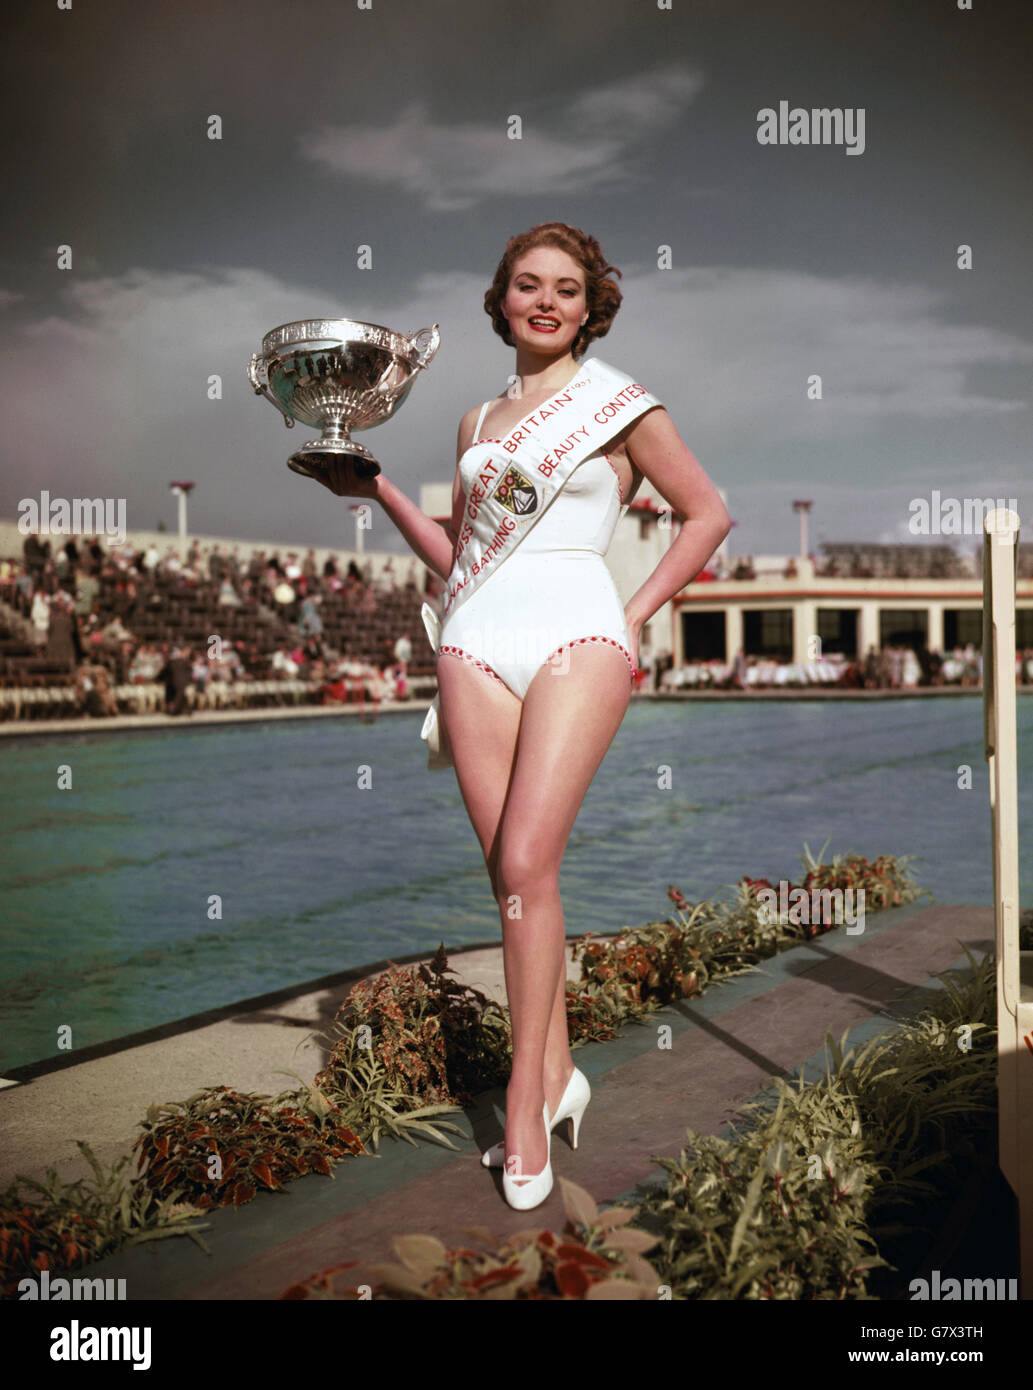 Leila Williams, of Walsall, pictured with the trophy when she was awarded Miss Great Britain at Morecambe, Lancashire. Leila, vitals statistics 36 23 36, will represent GB in Miss World in London in October. Stock Photo